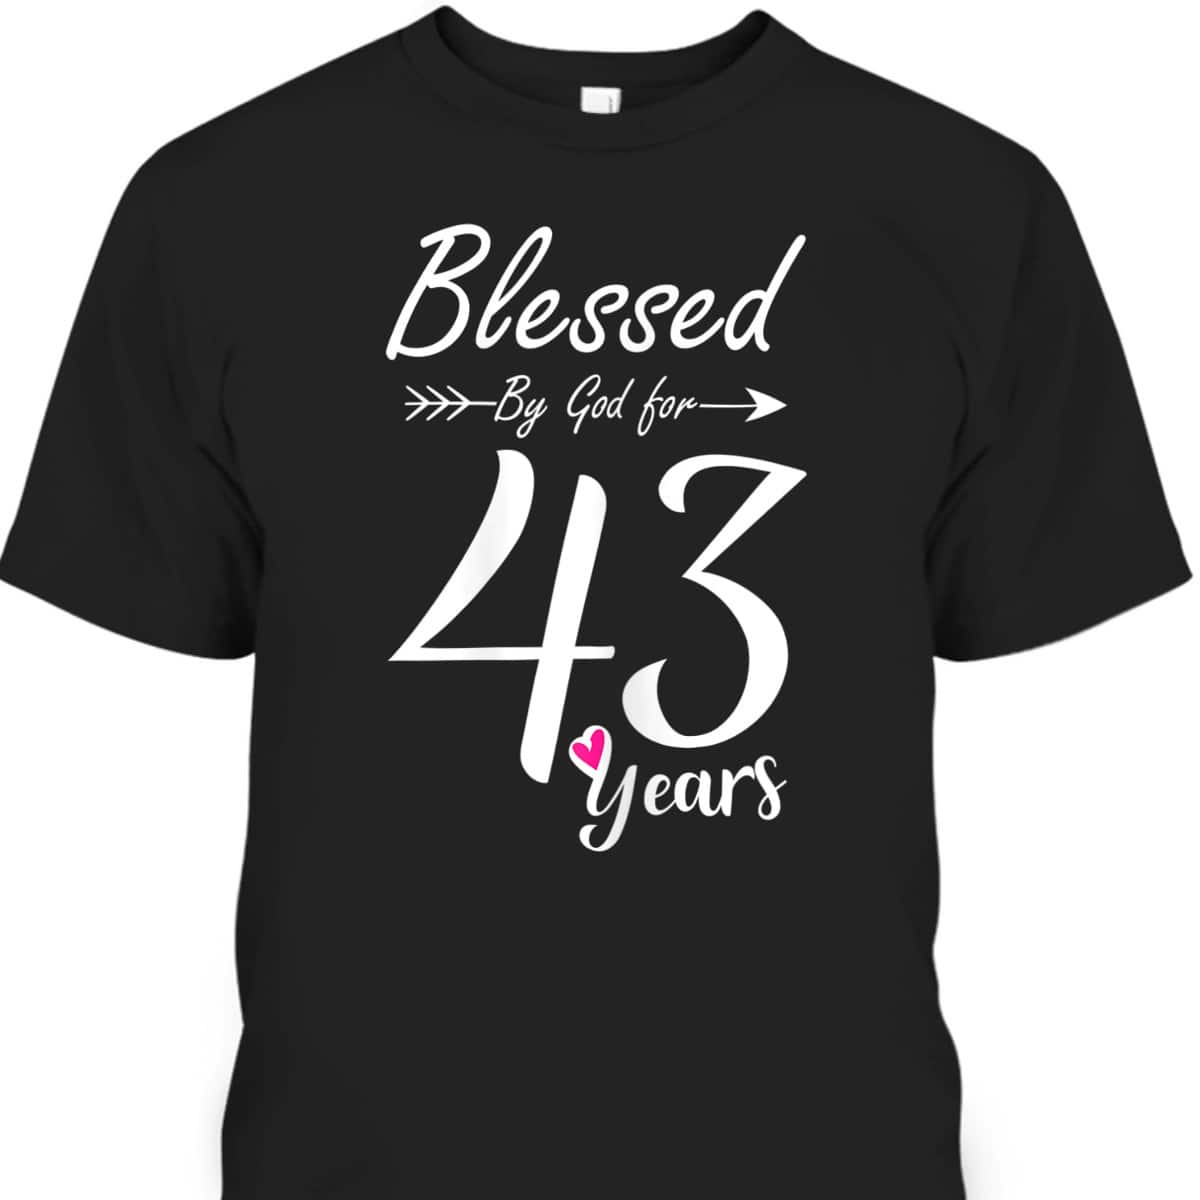 Christian 43rd Birthday Gift And Blessed For 43 Years Birthday T-Shirt